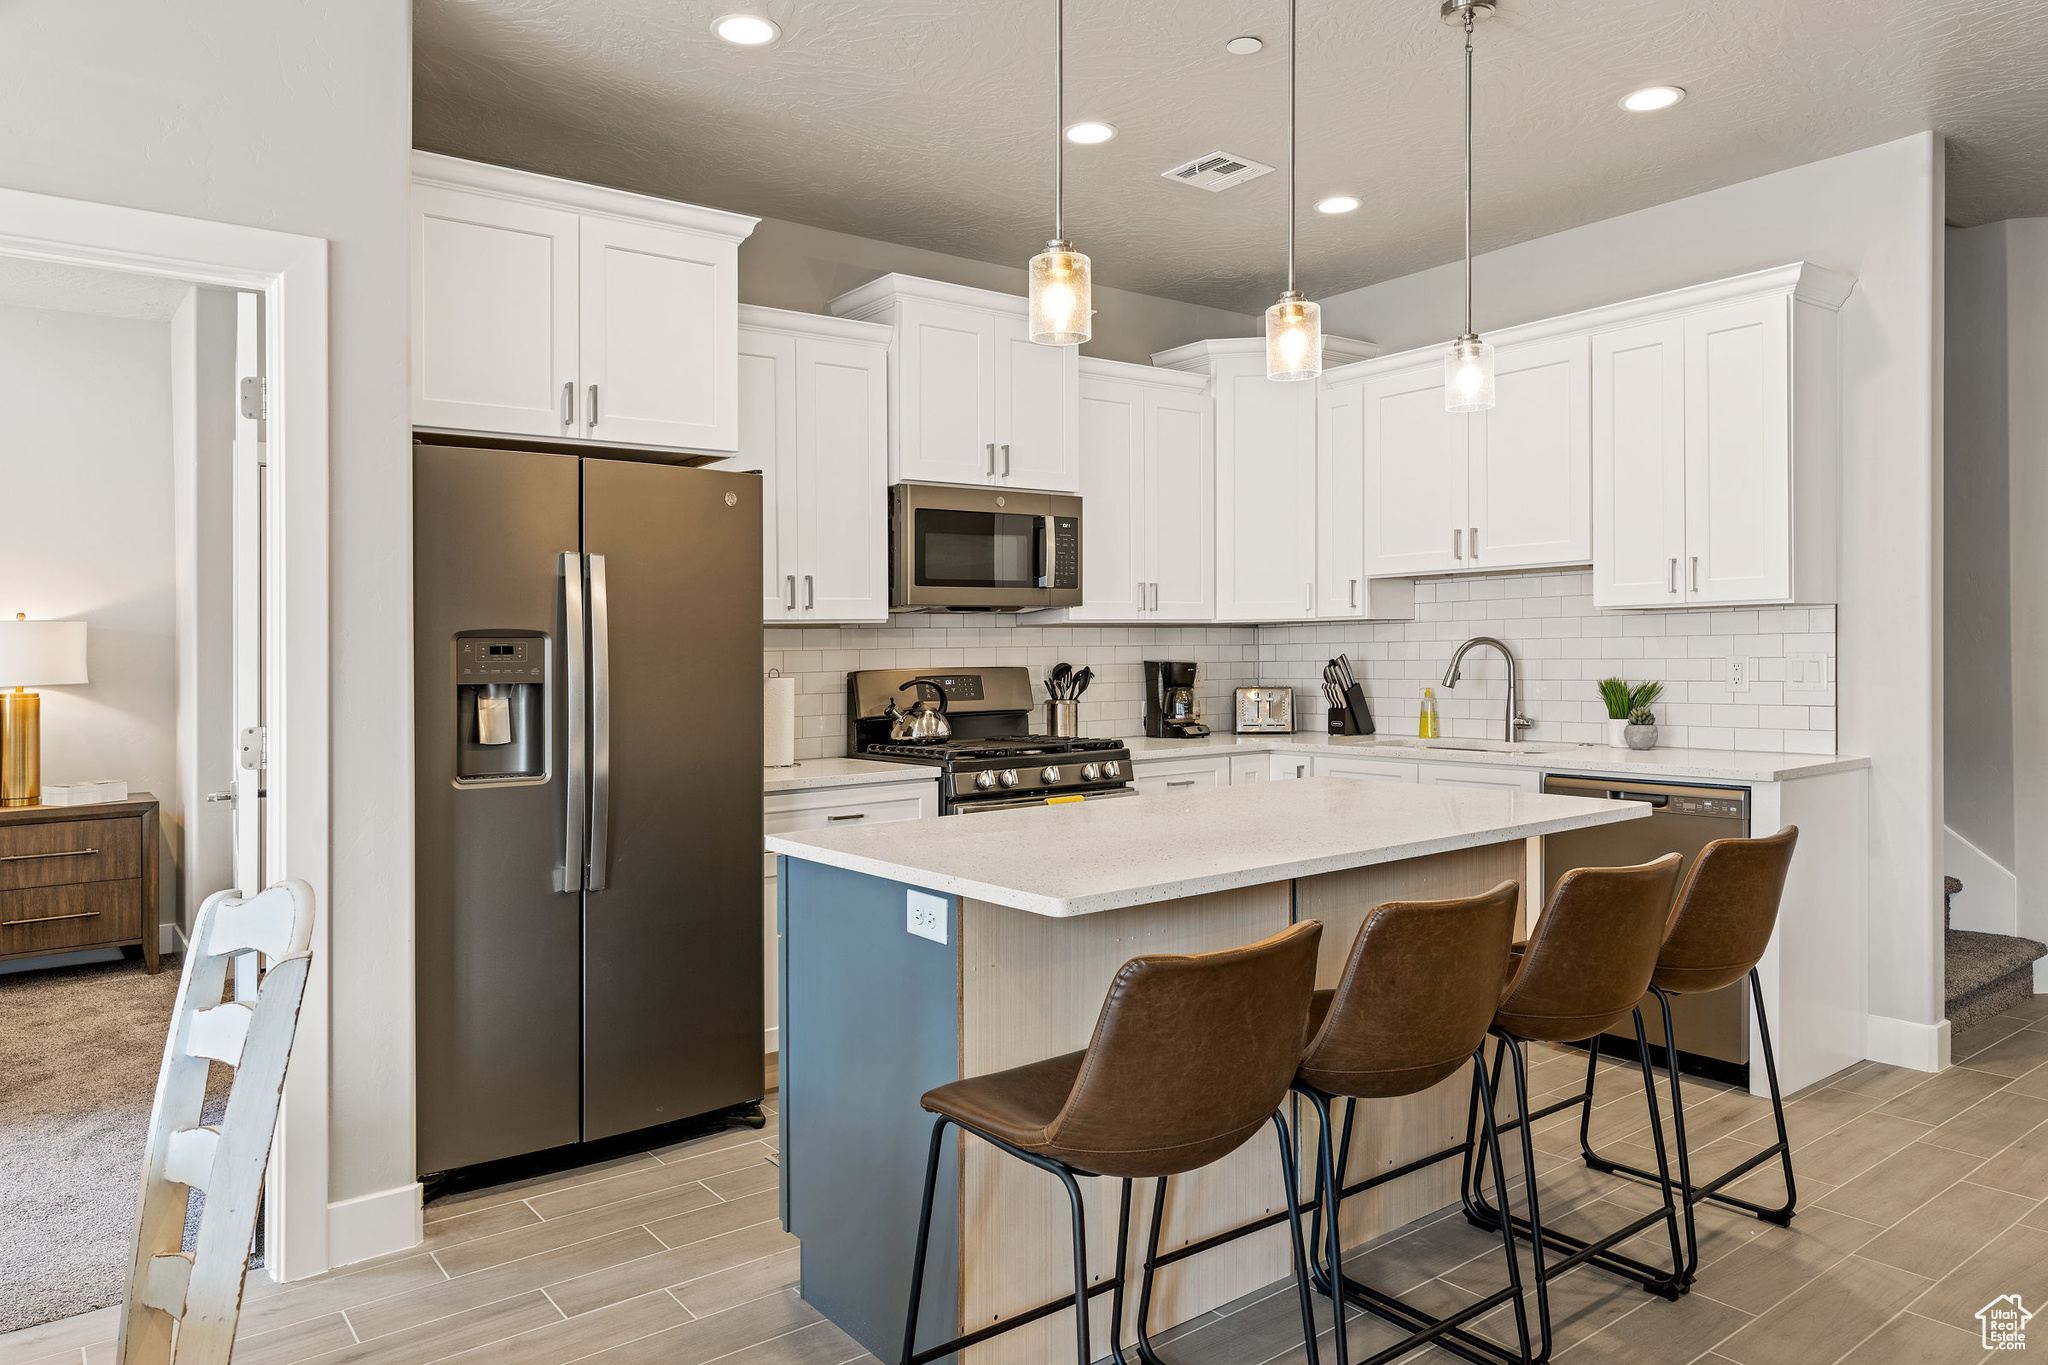 Kitchen featuring light colored carpet, hanging light fixtures, stainless steel appliances, a kitchen breakfast bar, and a center island